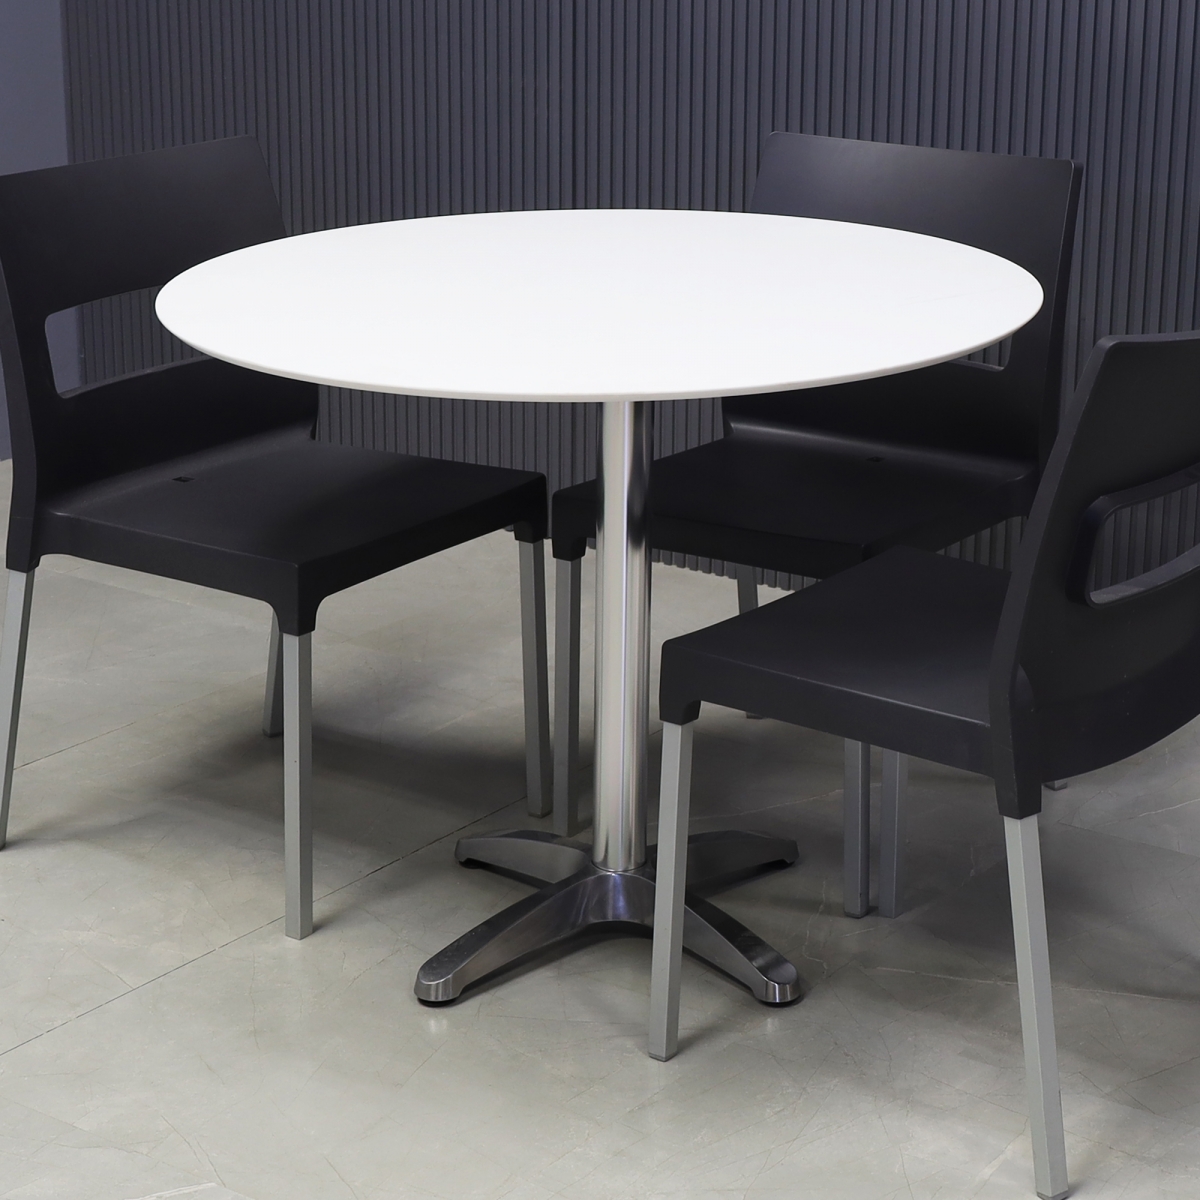 California Round Conference/Cafeteria Table with White Solid Engineered Stone Top - 29 In. - Stock #69